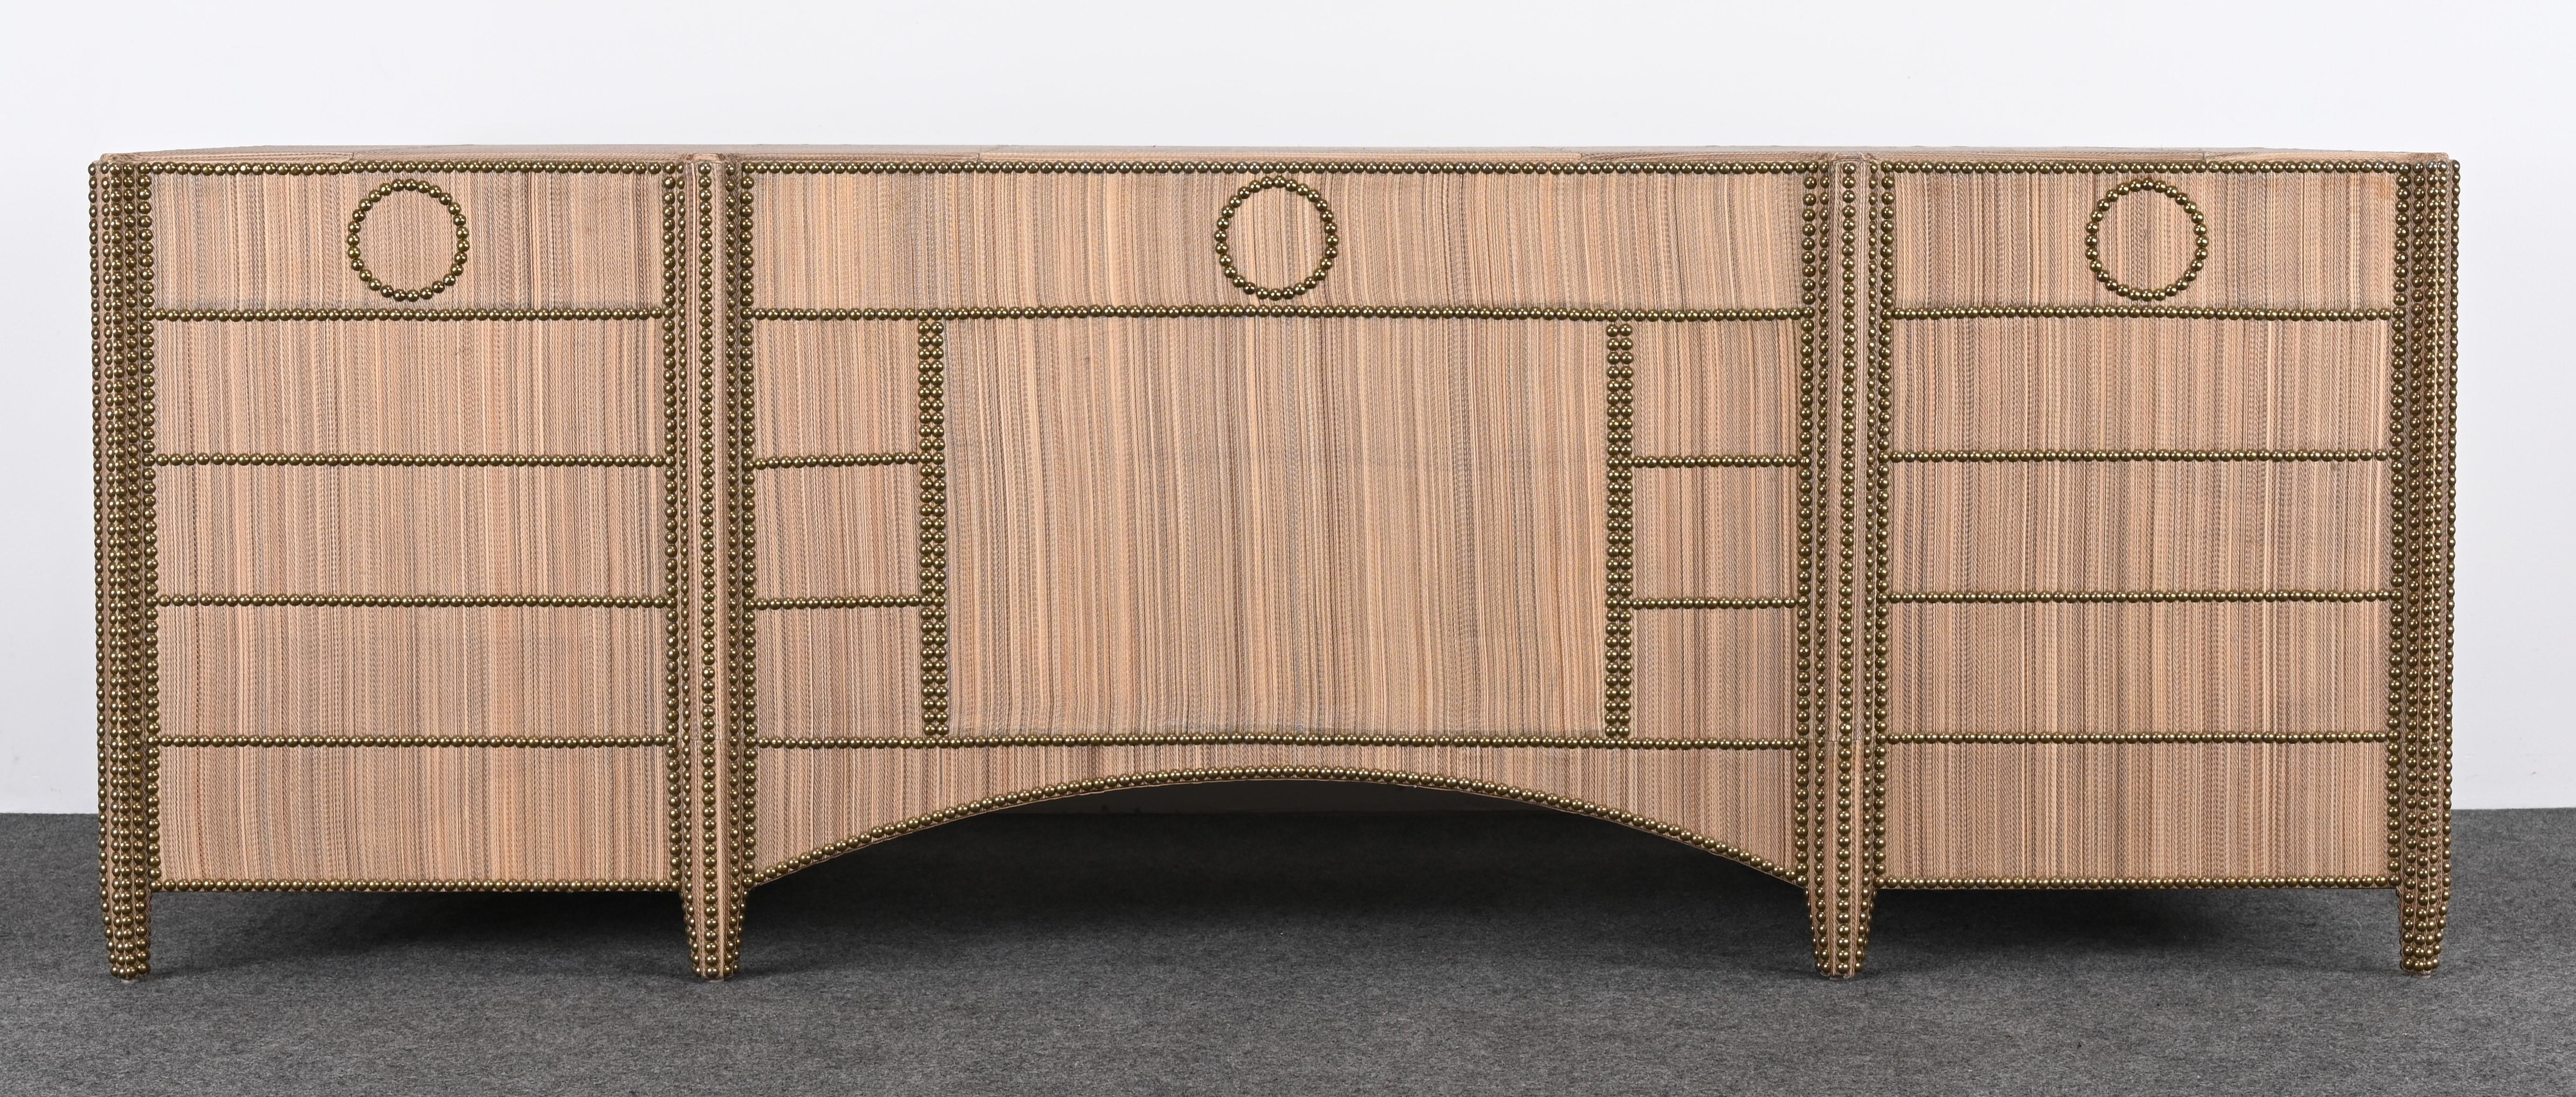 Monumental Custom Horsehair Desk by Peter Marino, 20th Century USA For Sale 5